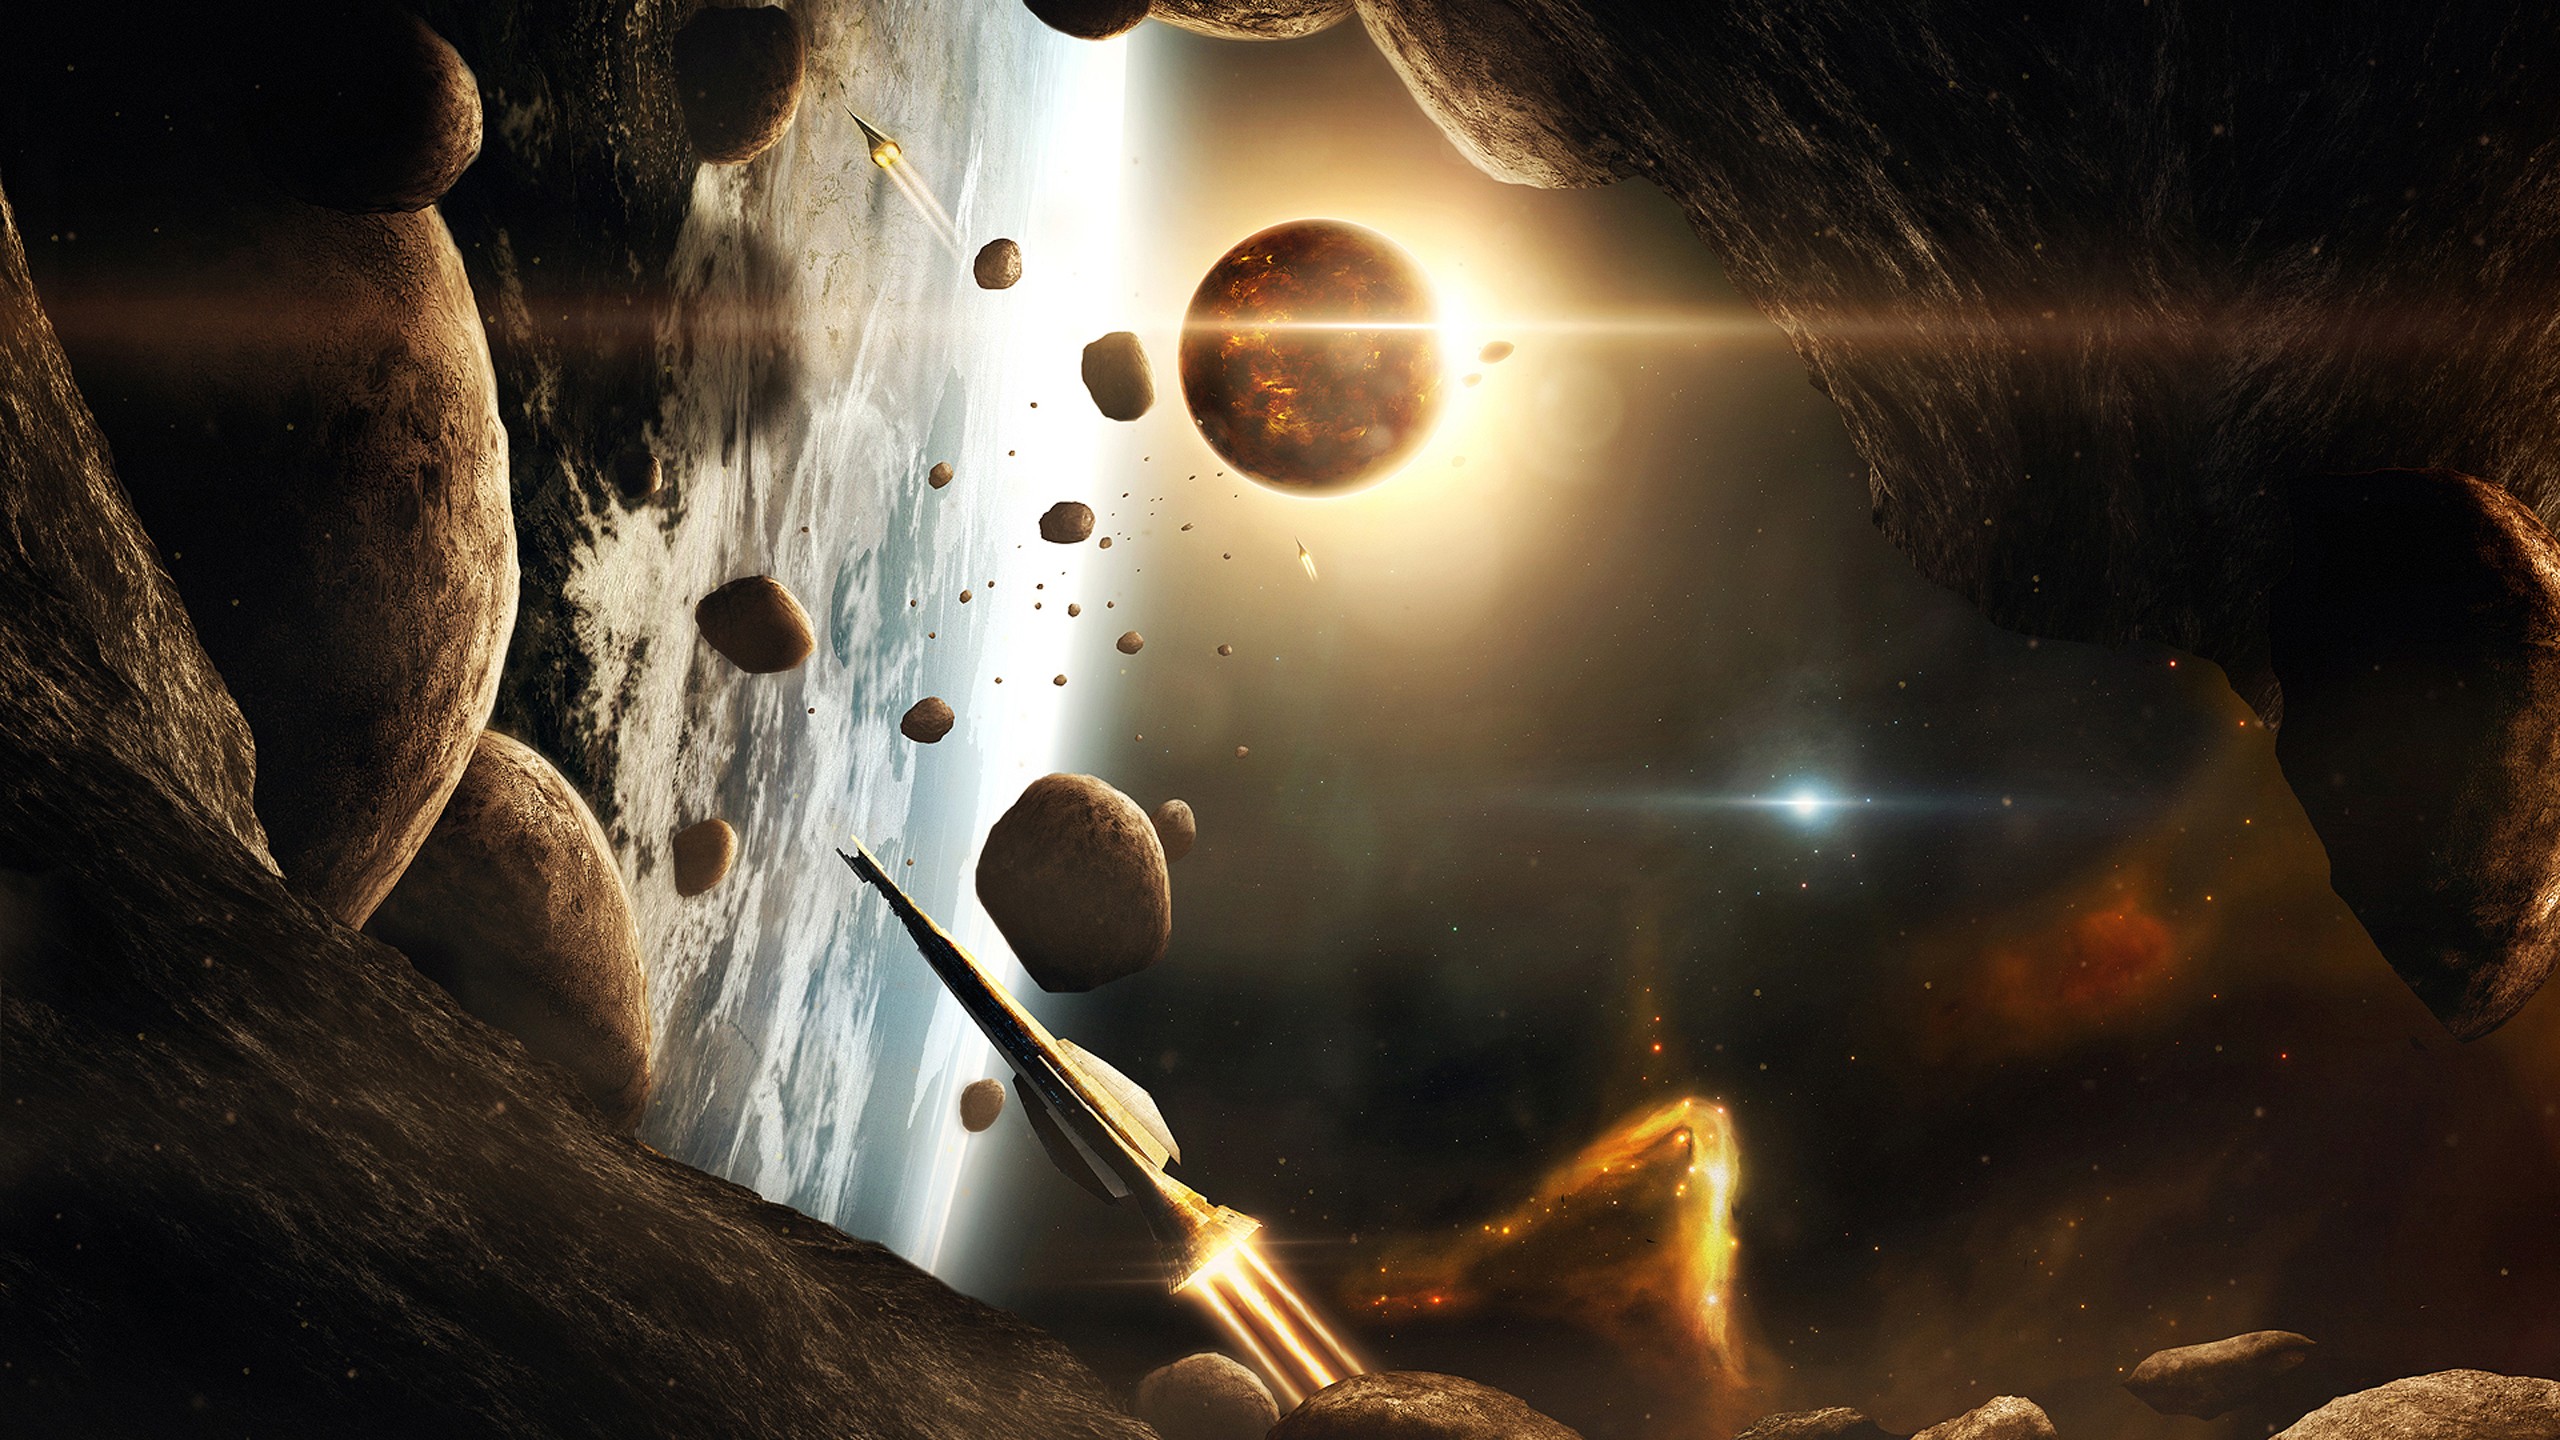 General 2560x1440 space rocks space art spaceship planet science fiction